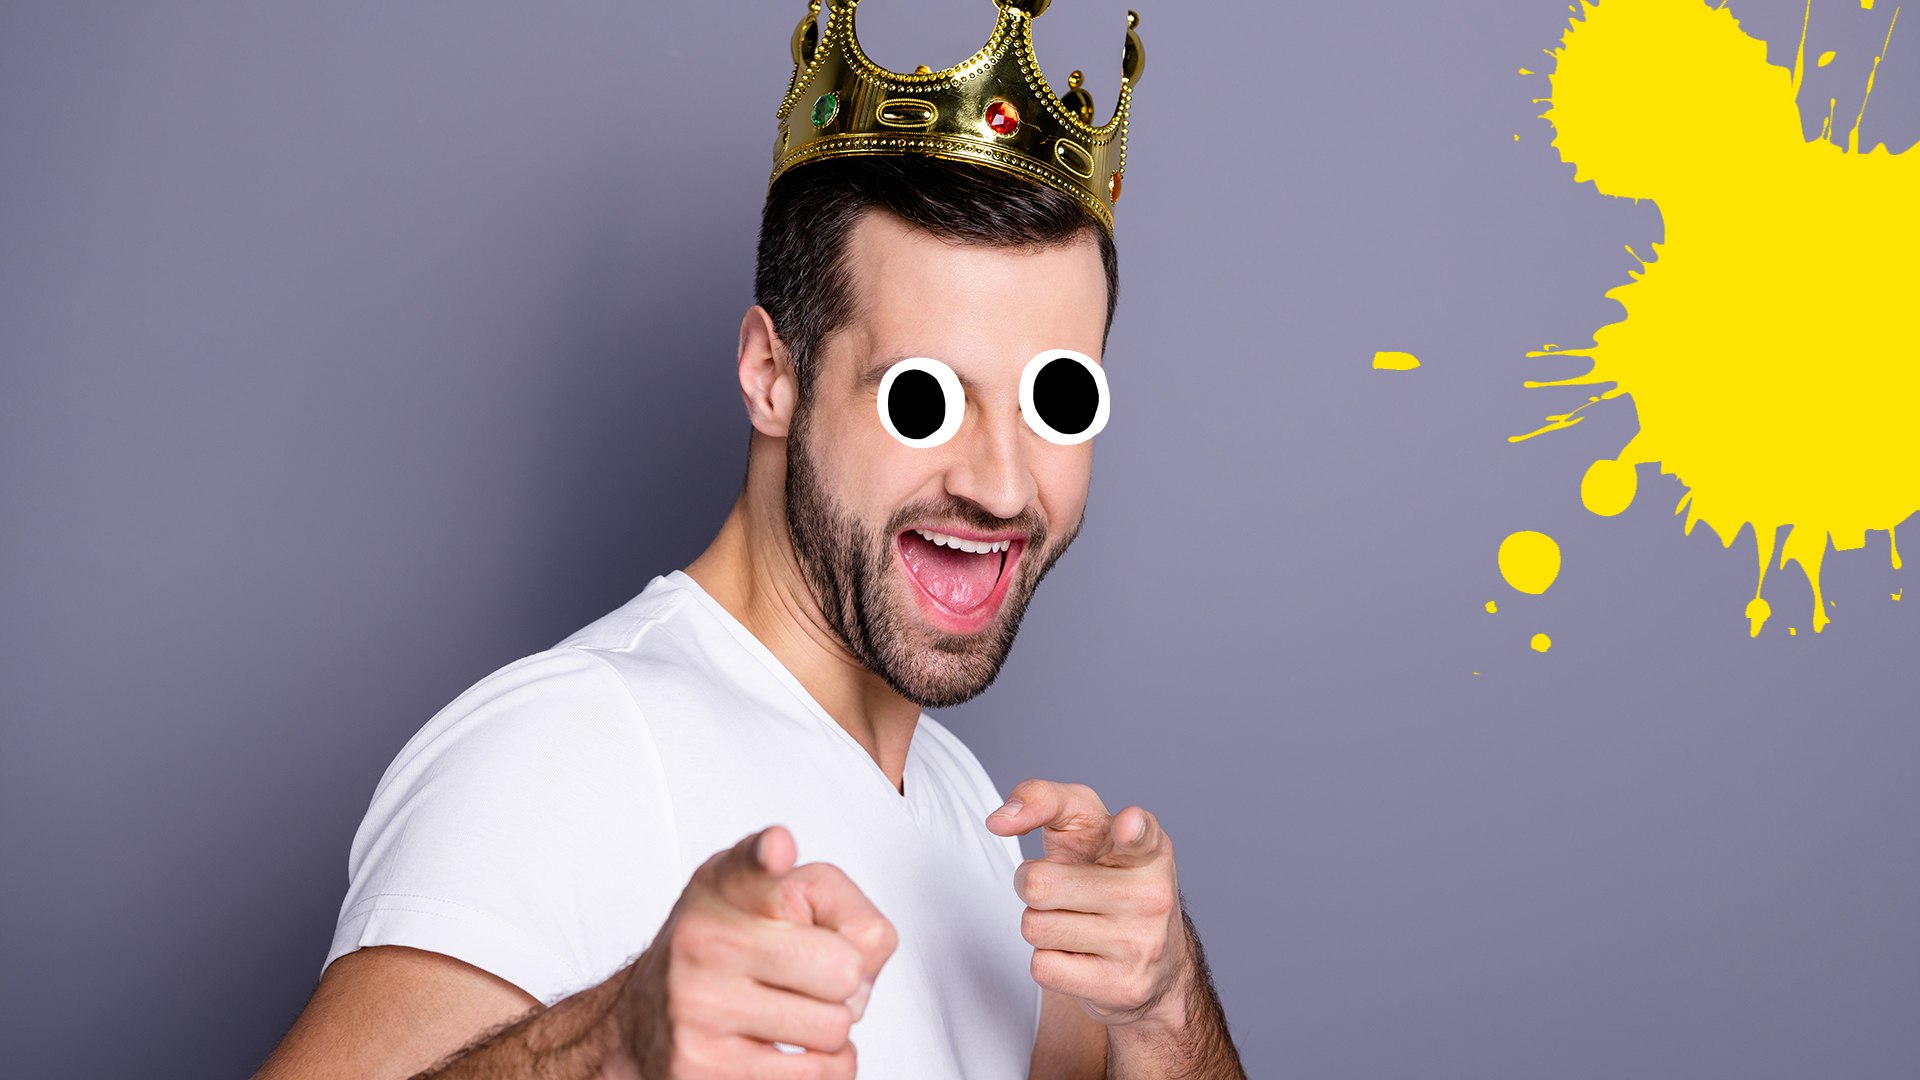 Man in crown on grey background with splats